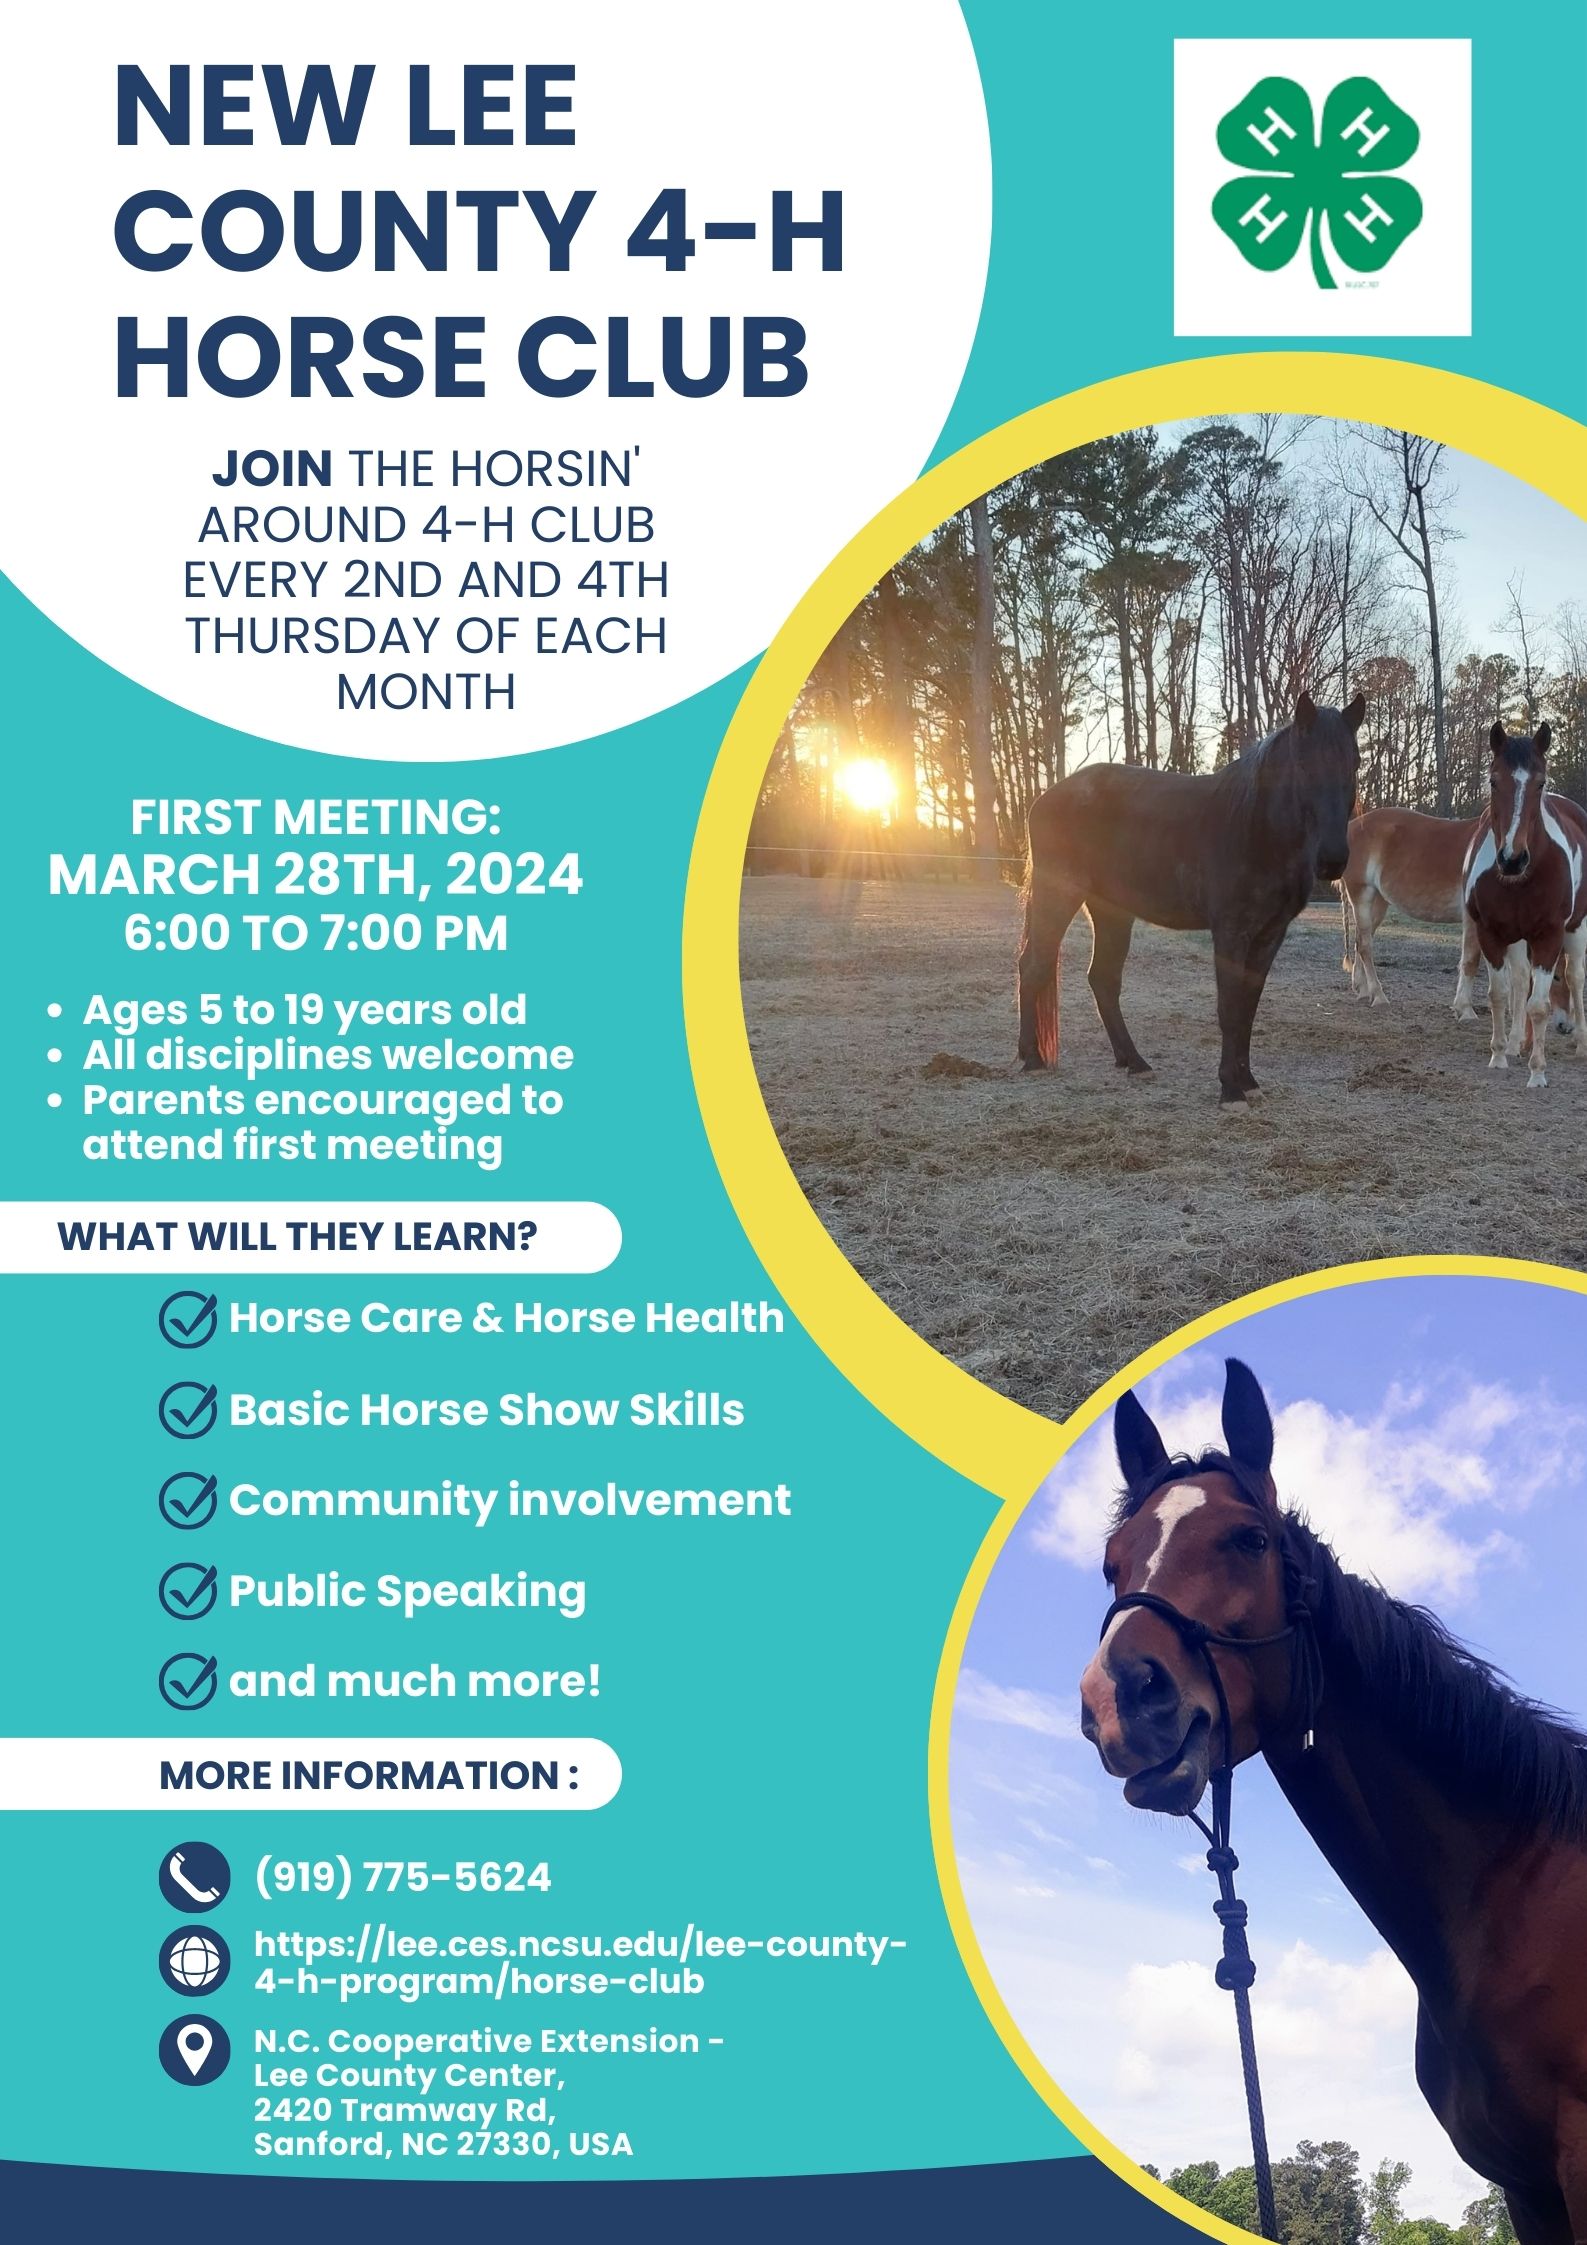 join the horsin' around 4-H club every 2nd and 4th thursday of each month